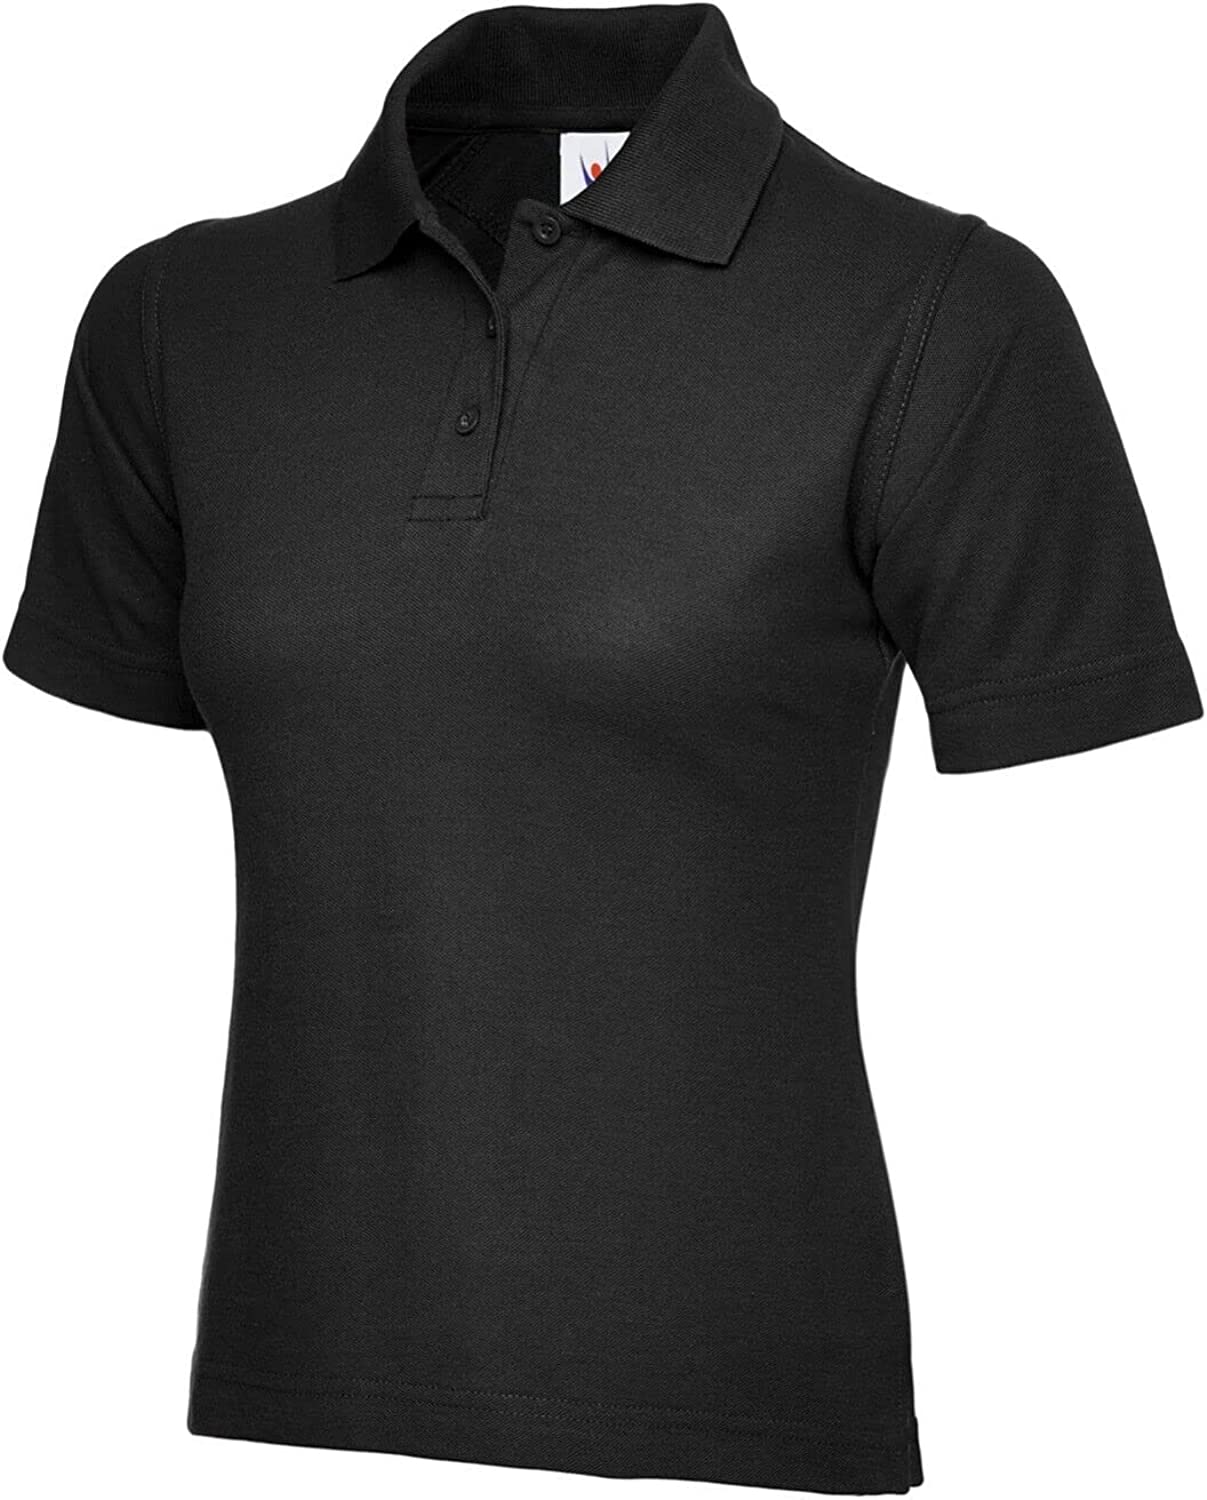 Ladies Plain Slim Fit Short Sleeve Collared T Shirts Womens Casual Sports Work Wear Tops